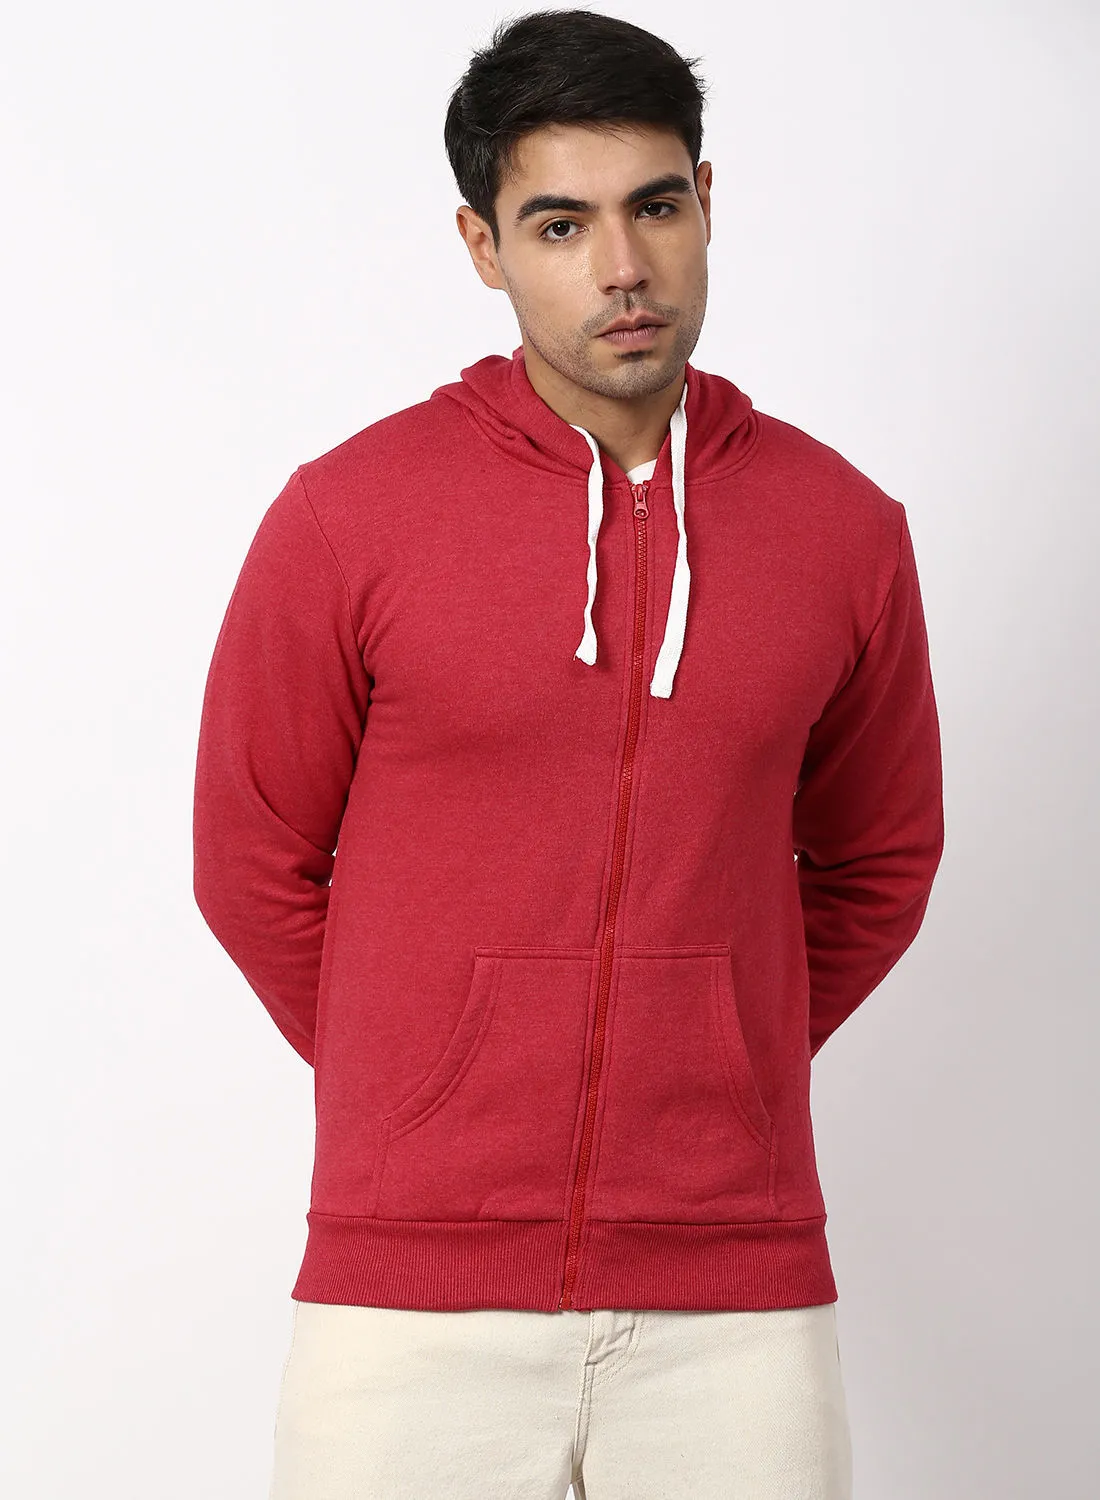 Campus Sutra Stylish Comfortable Hoodie Light Maroon Red